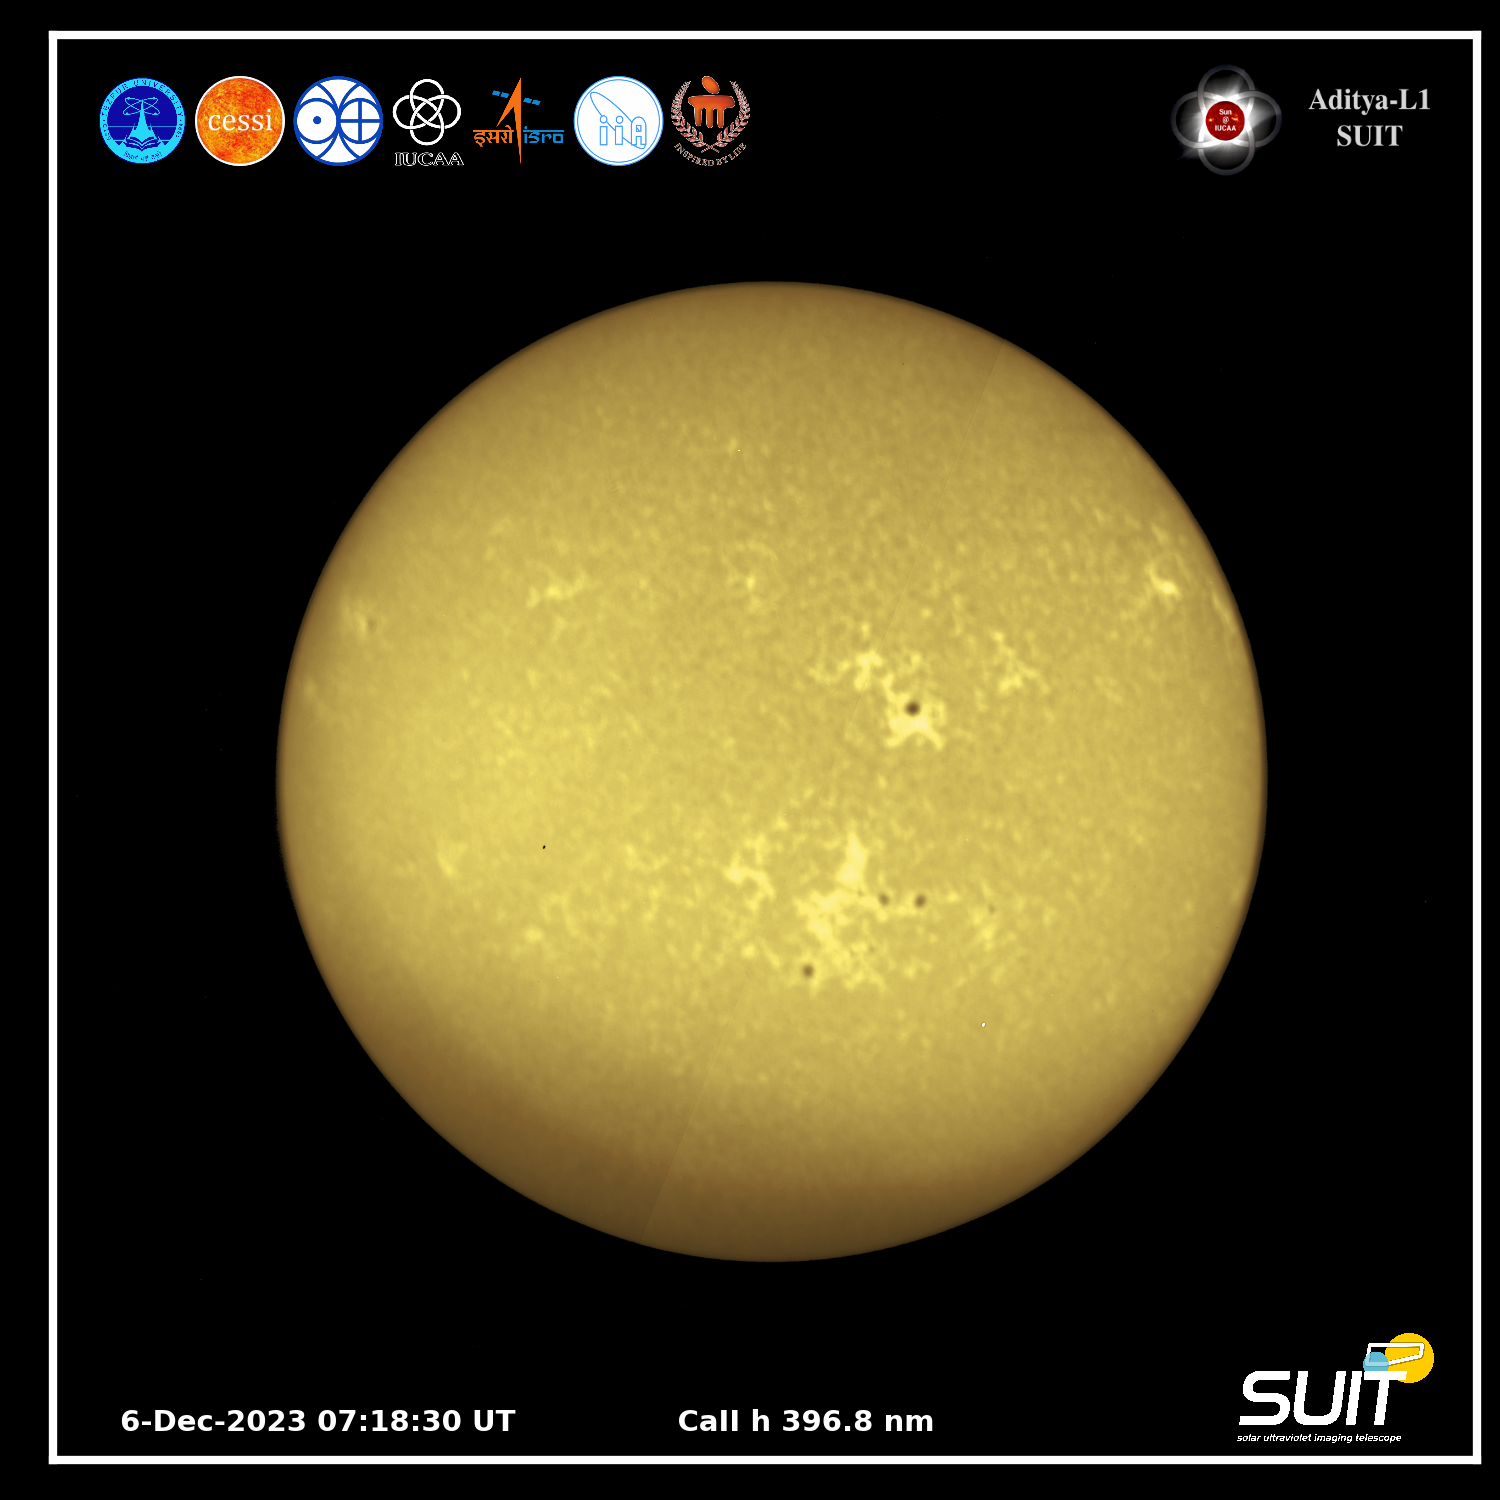 1st ever snaps of the full sun captured by India's Aditya-L1 Mission